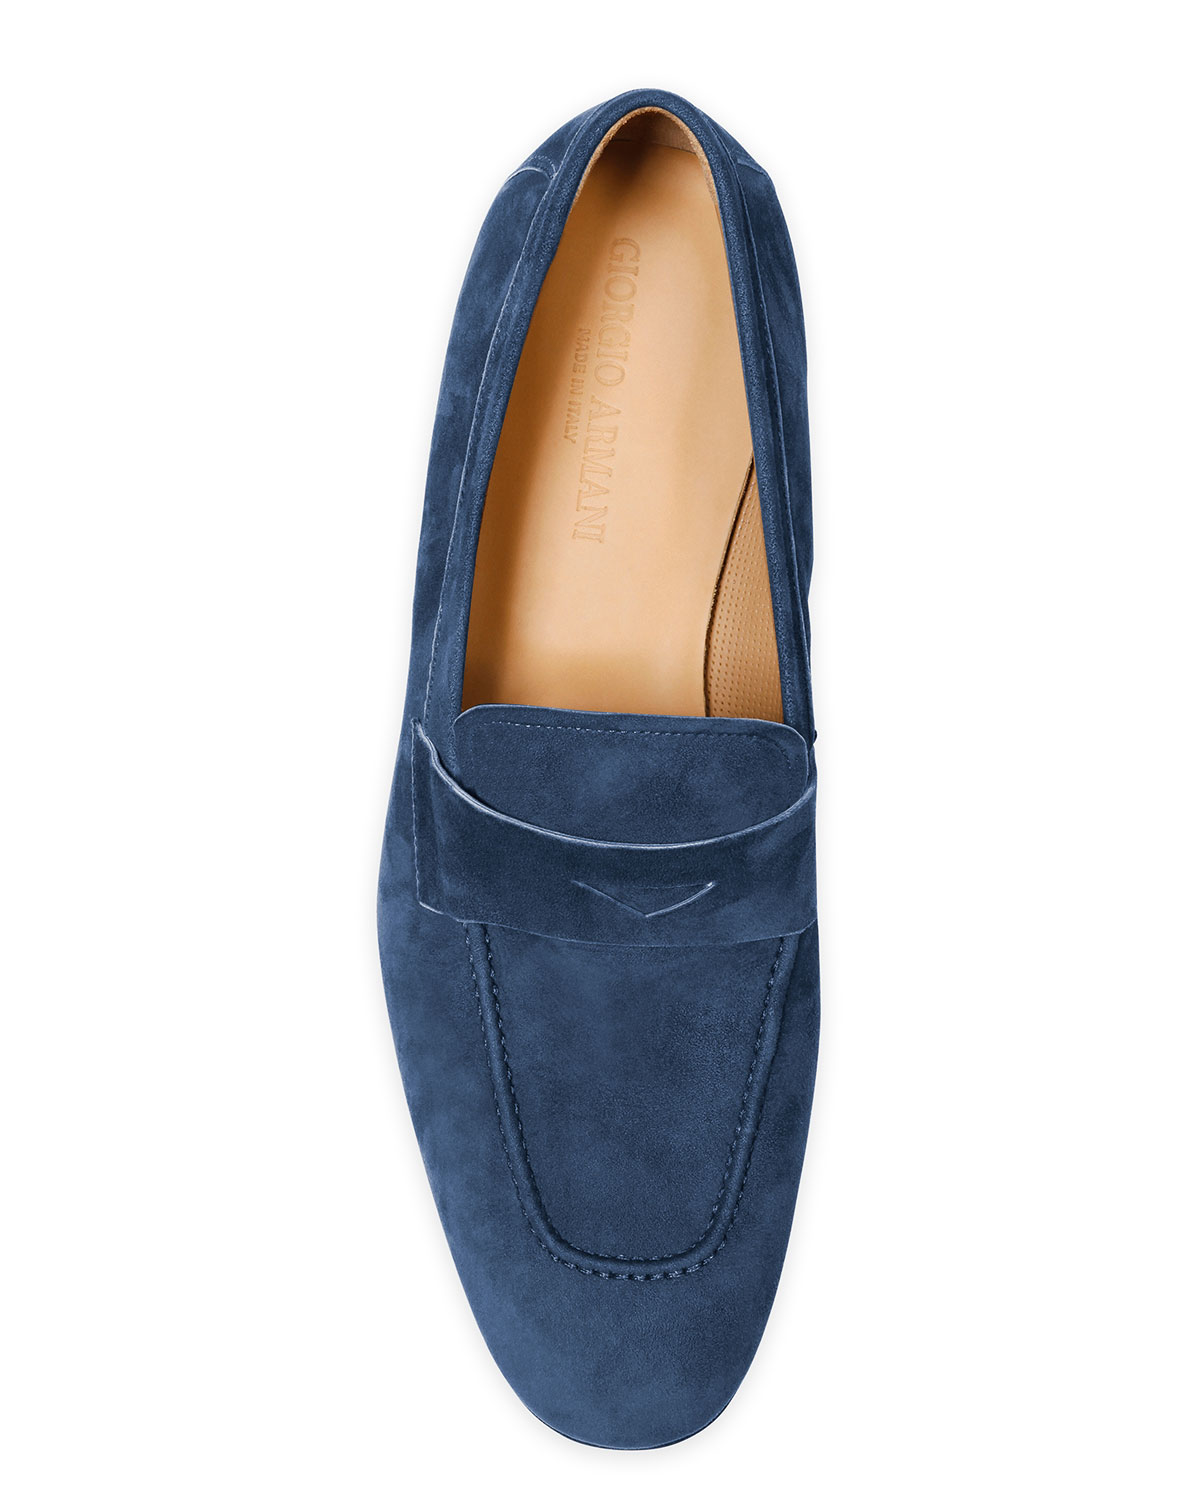 Giorgio armani Suede Penny Loafers in Blue | Lyst